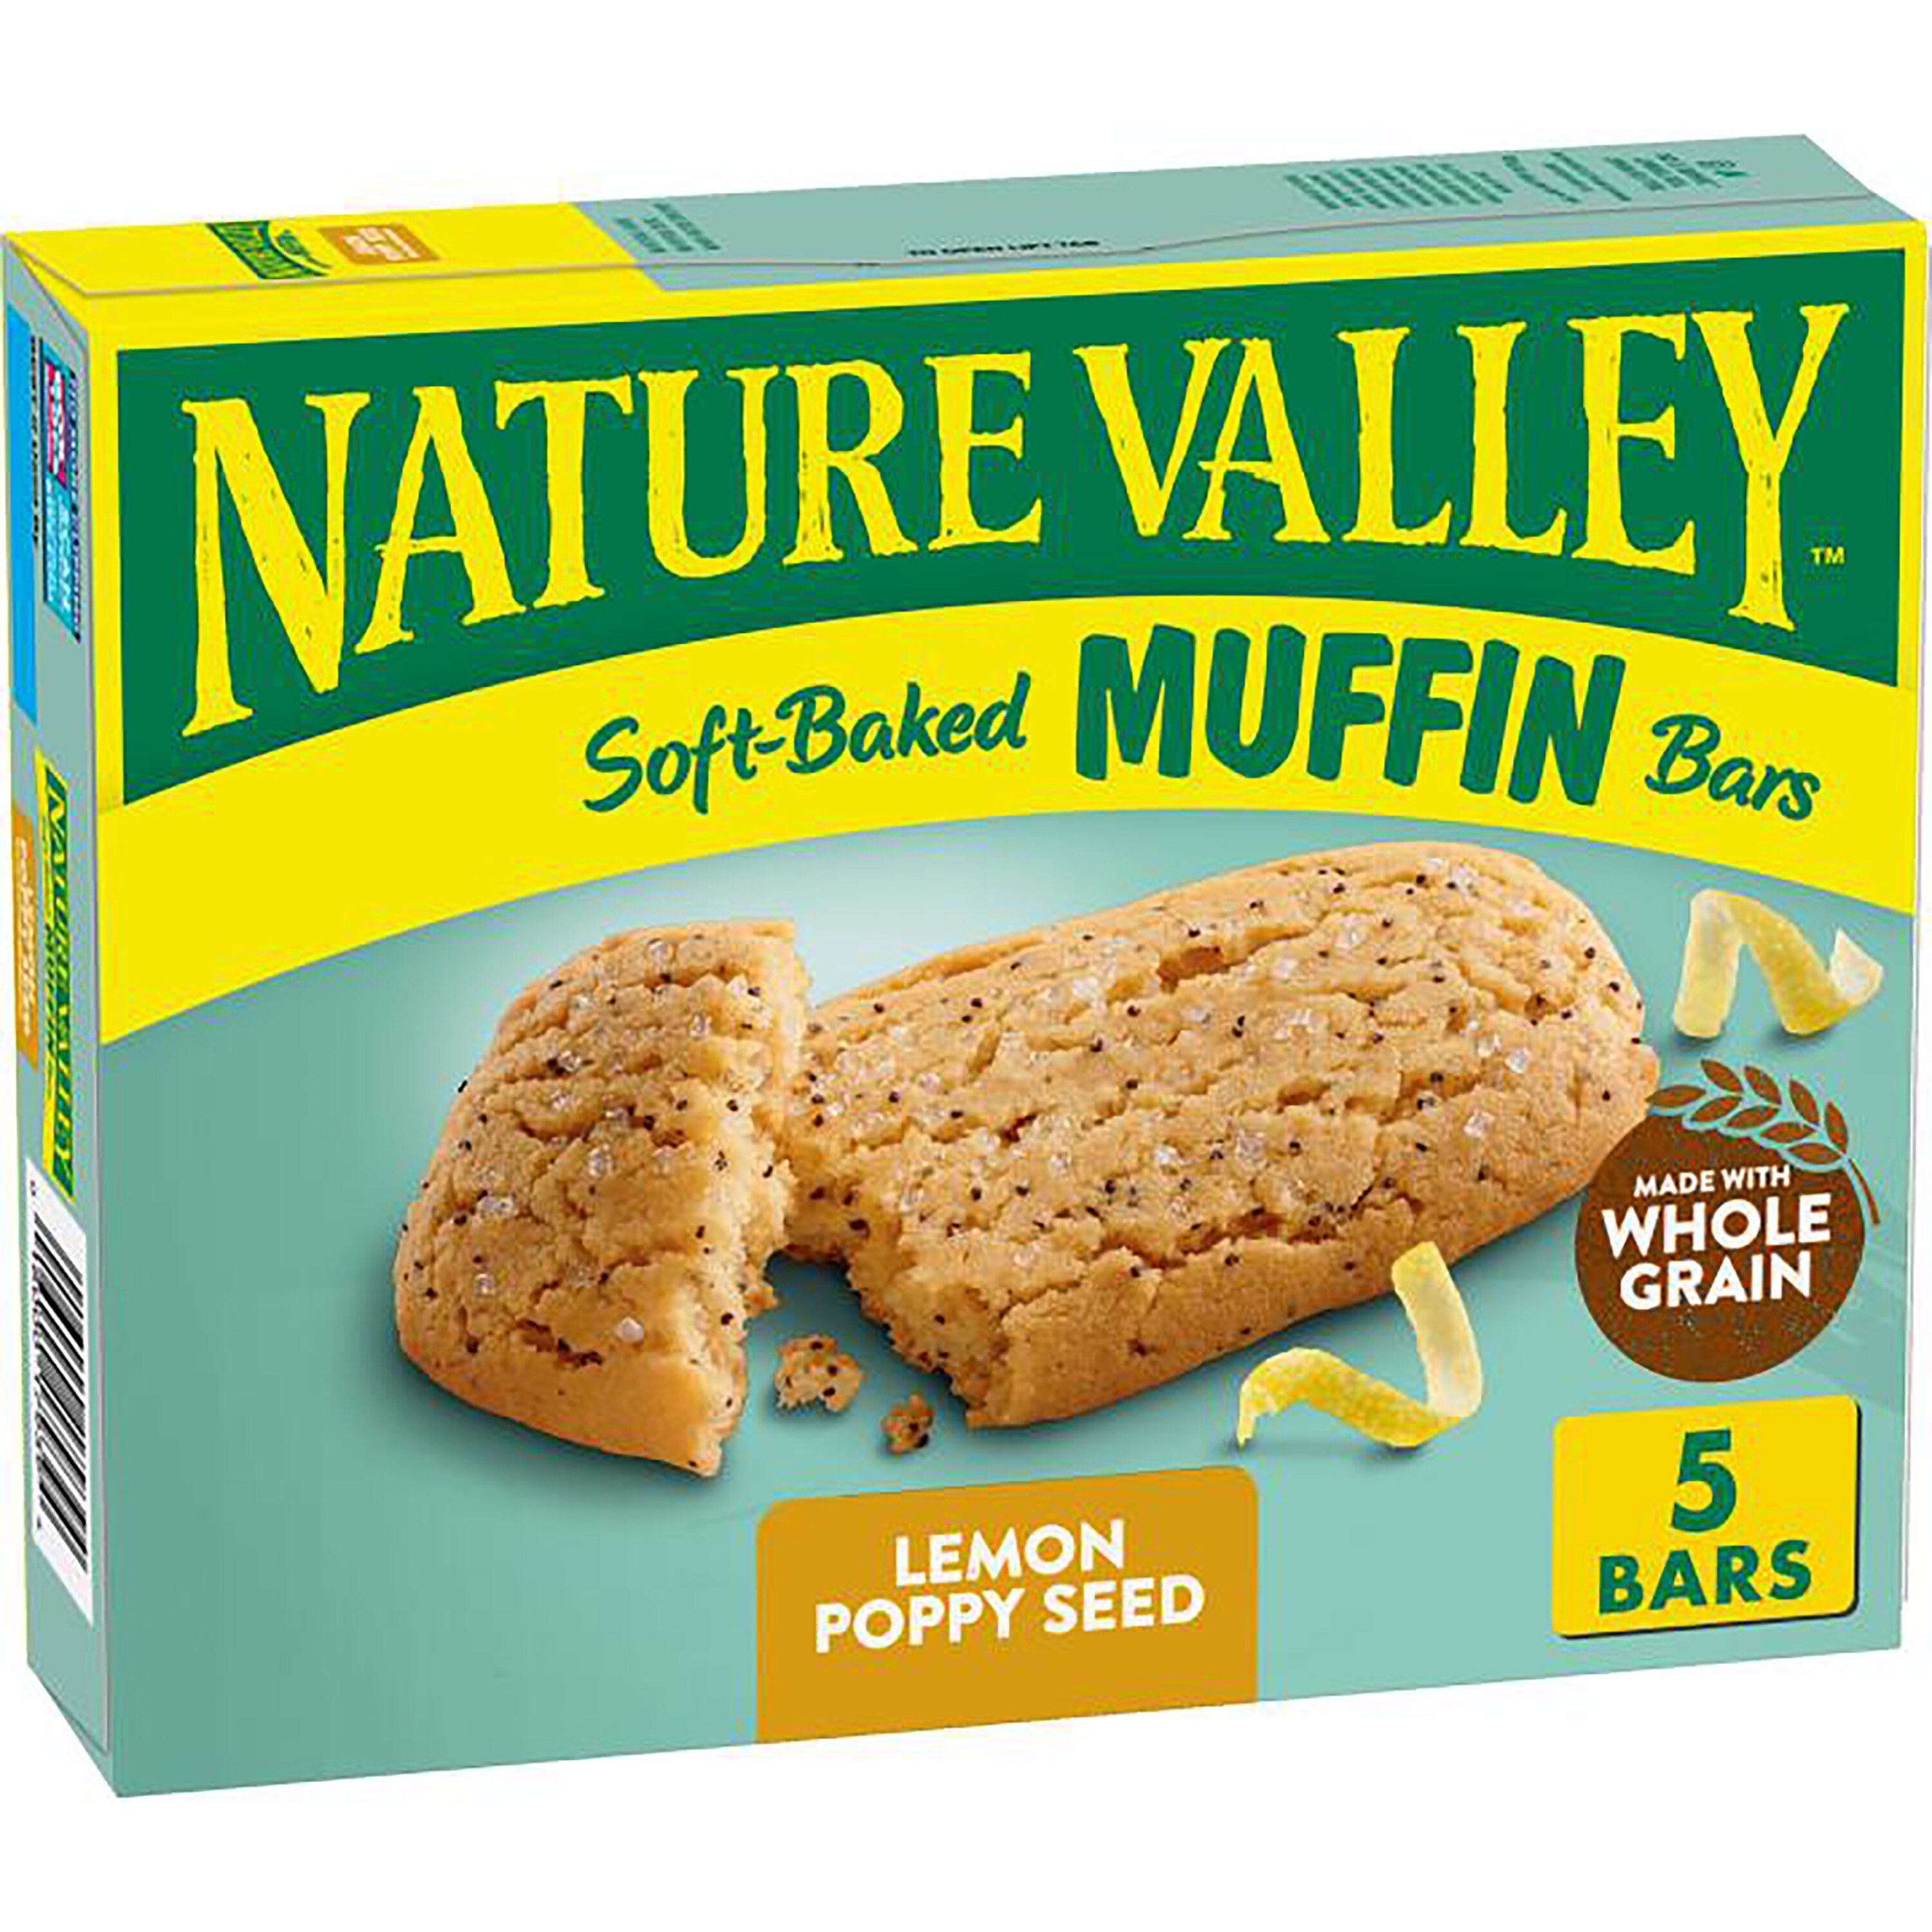 Nature Valley Lemon Poppy Seed Soft-Baked Muffin Bars, 5 CT